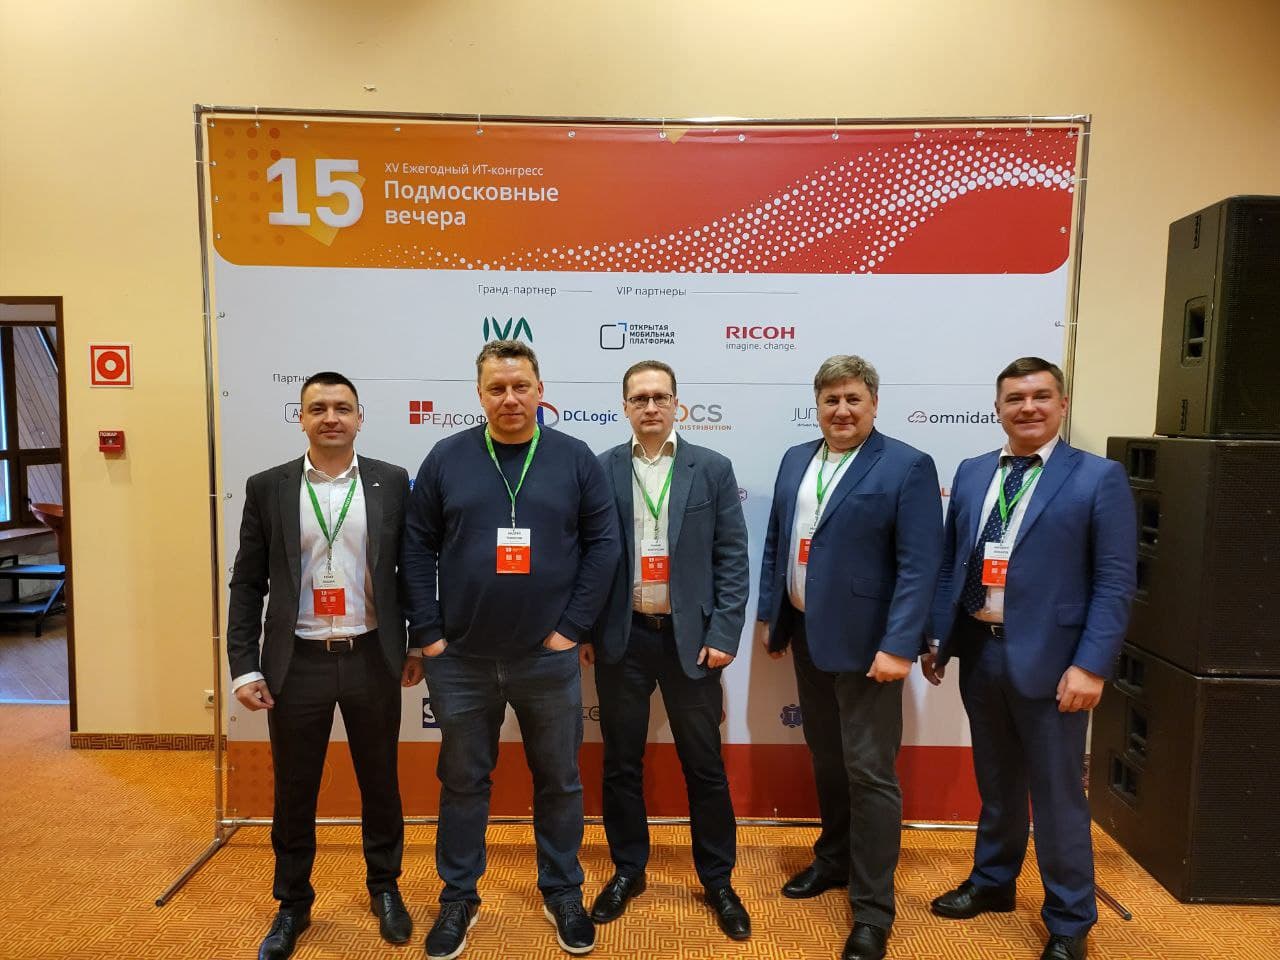 RED SOFT talked about software import substitution in the Moscow region